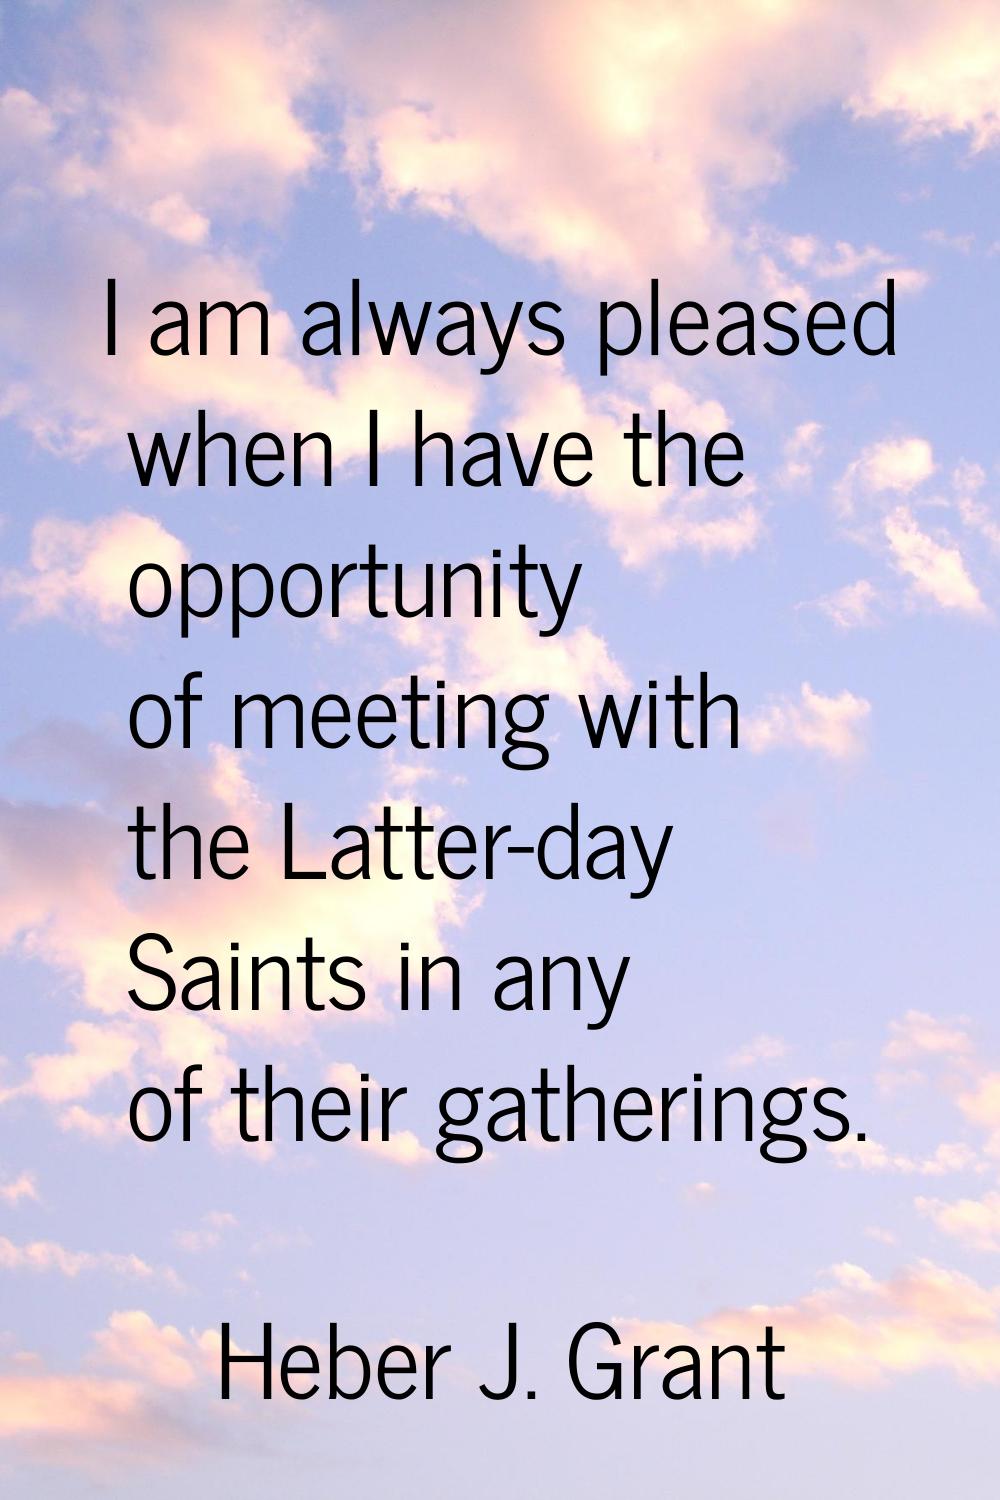 I am always pleased when I have the opportunity of meeting with the Latter-day Saints in any of the